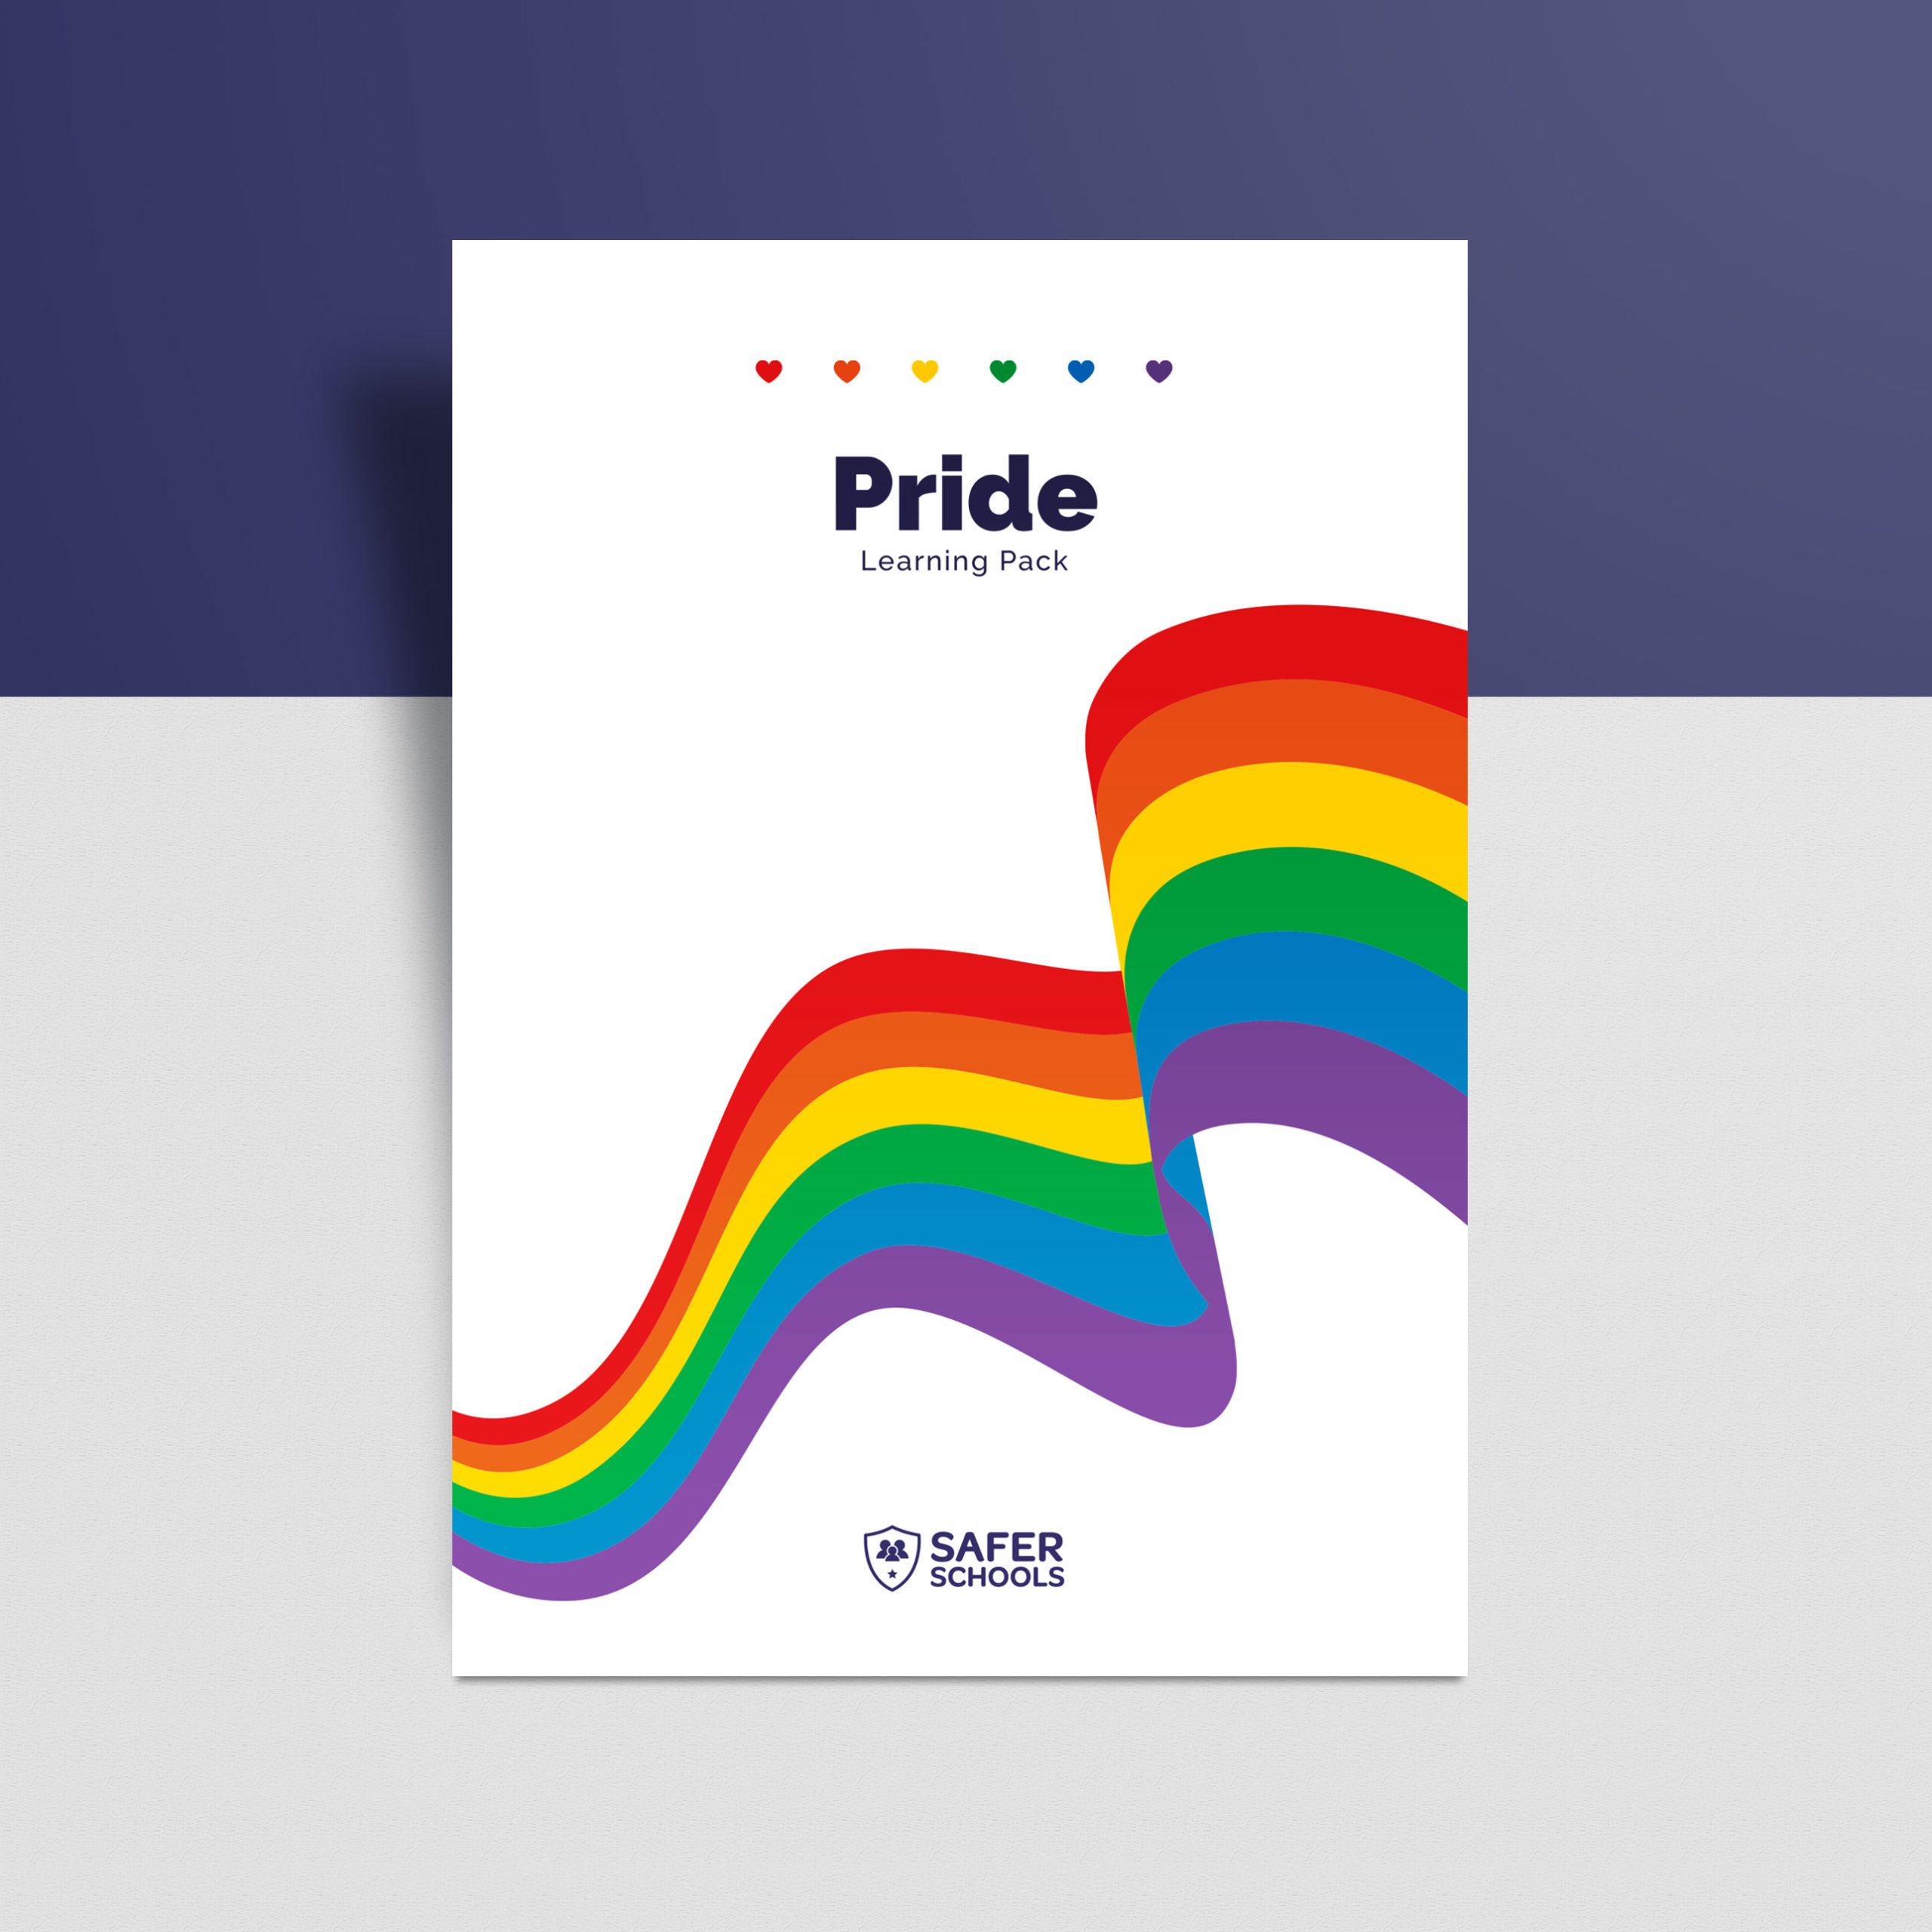 image of the pride learning pack